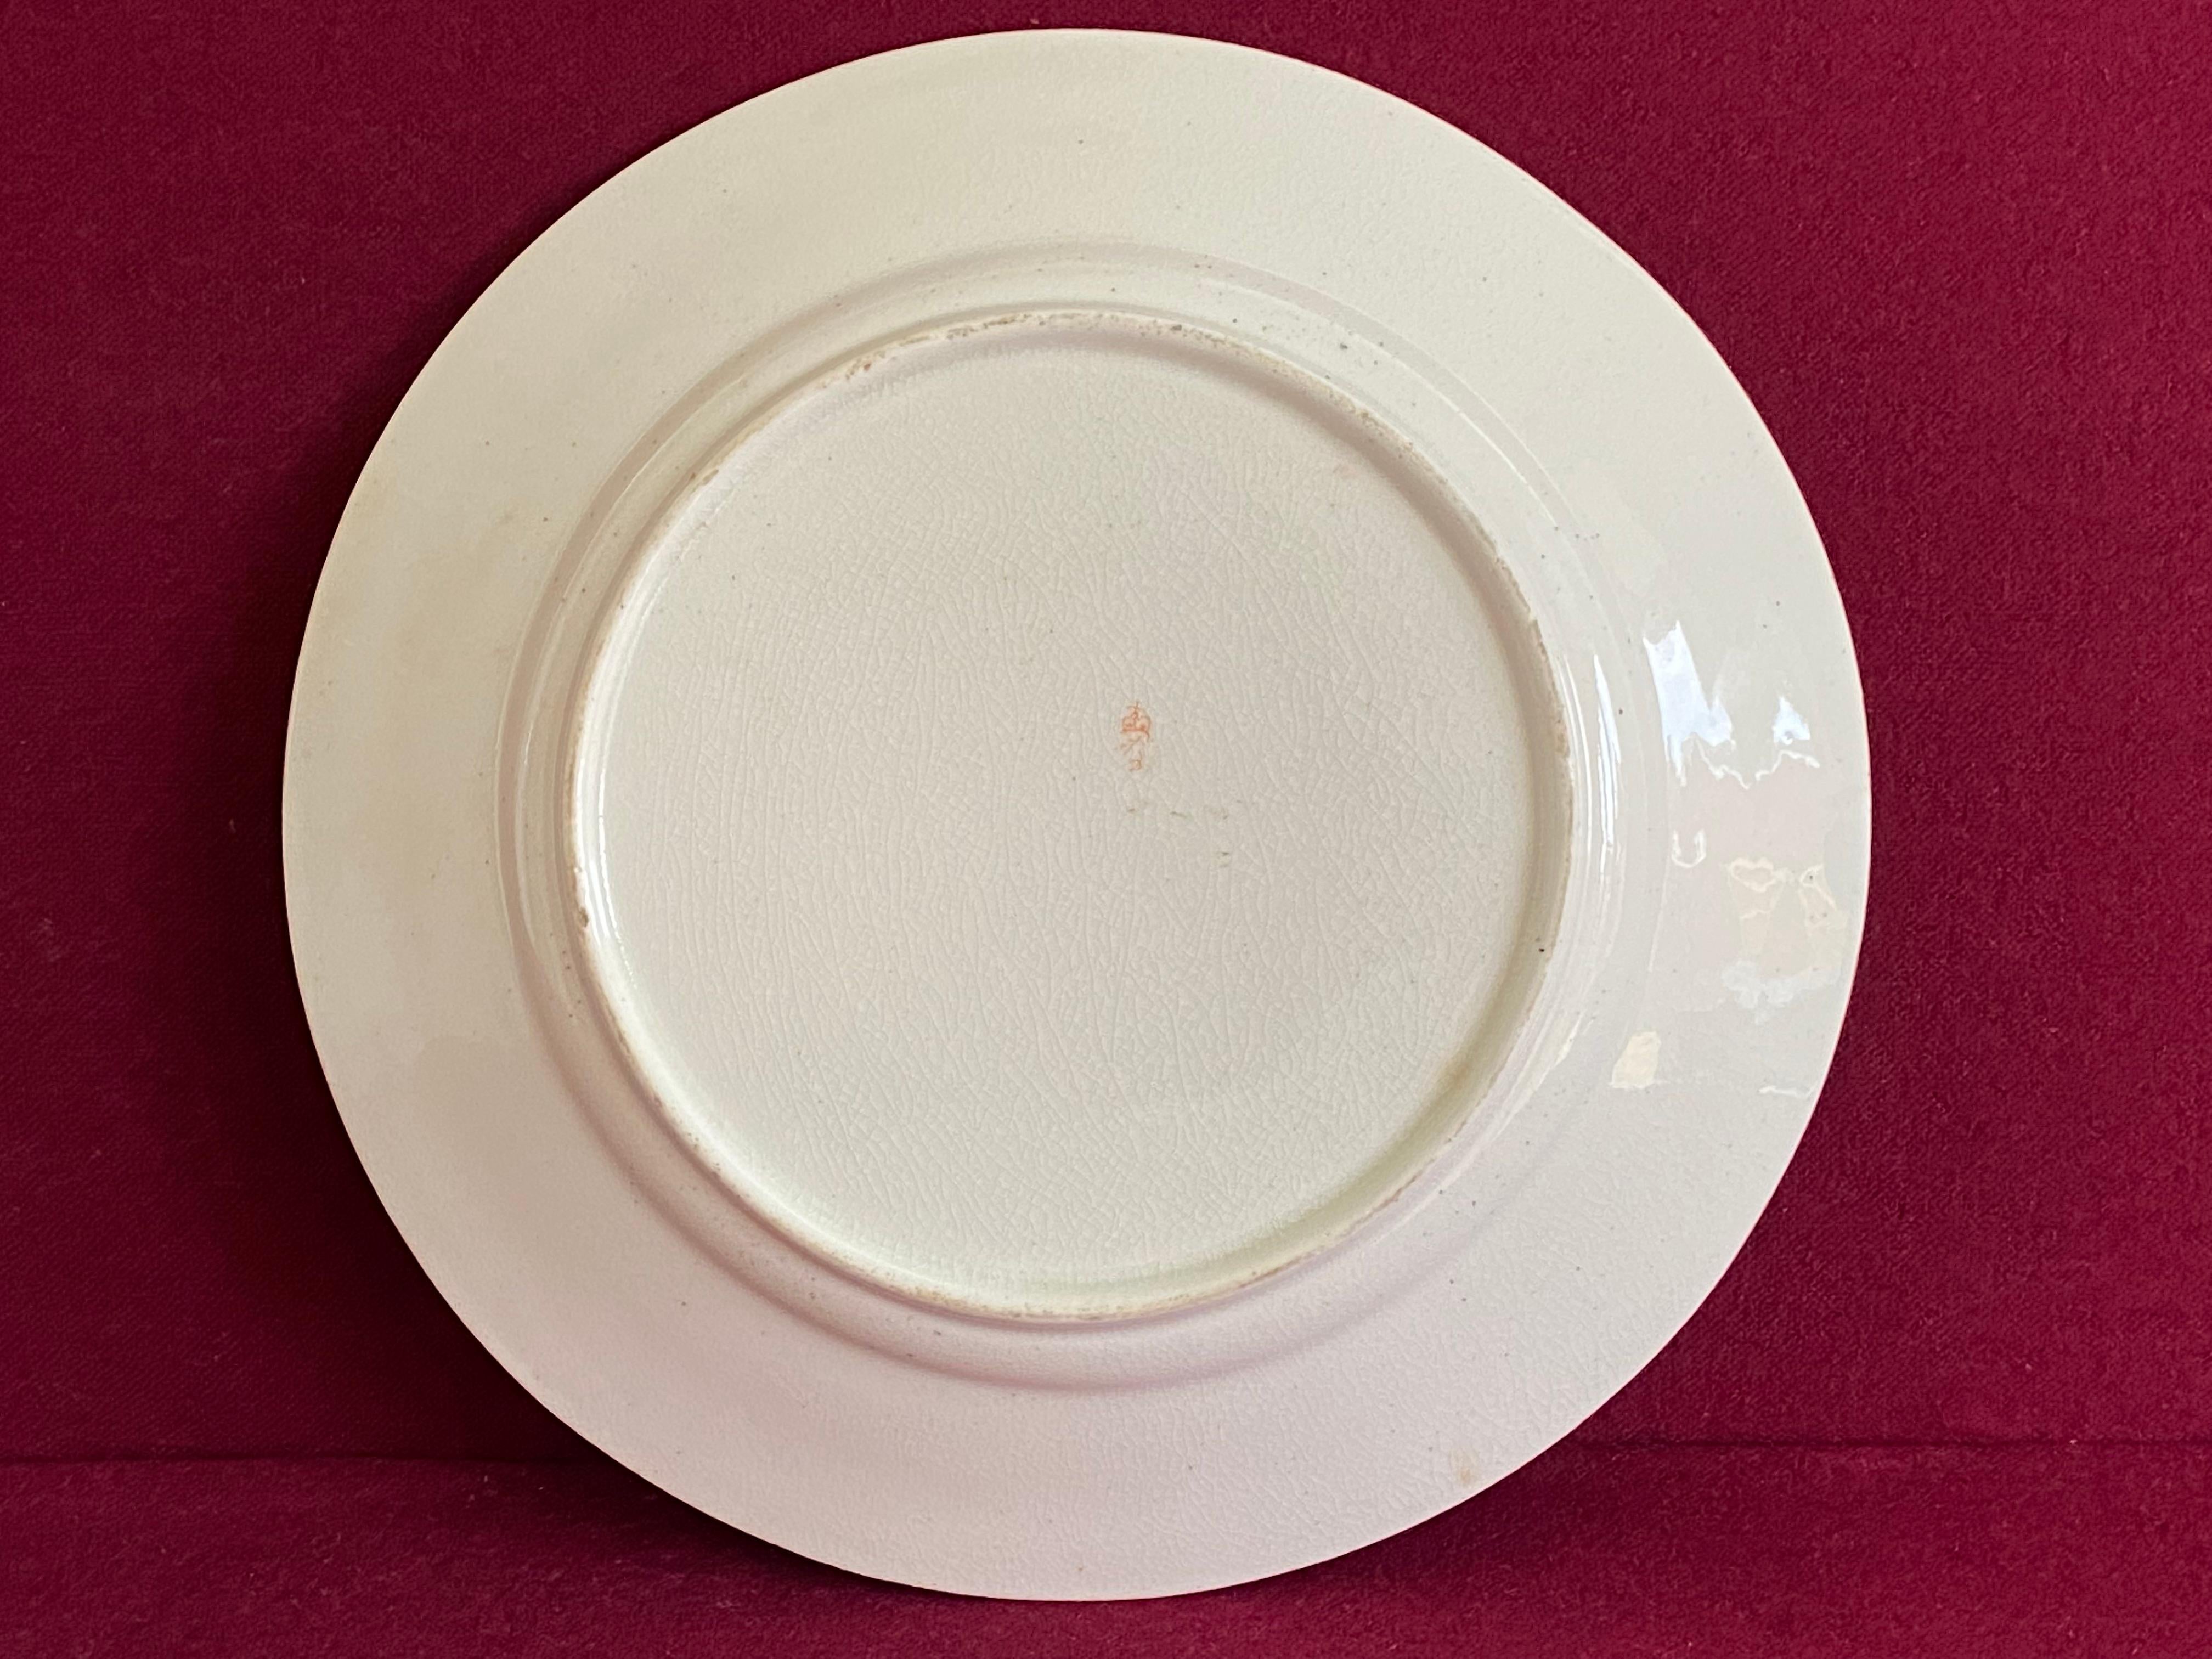 19th Century Derby Porcelain Dessert Plate Decorated by Thomas Steele c.1815